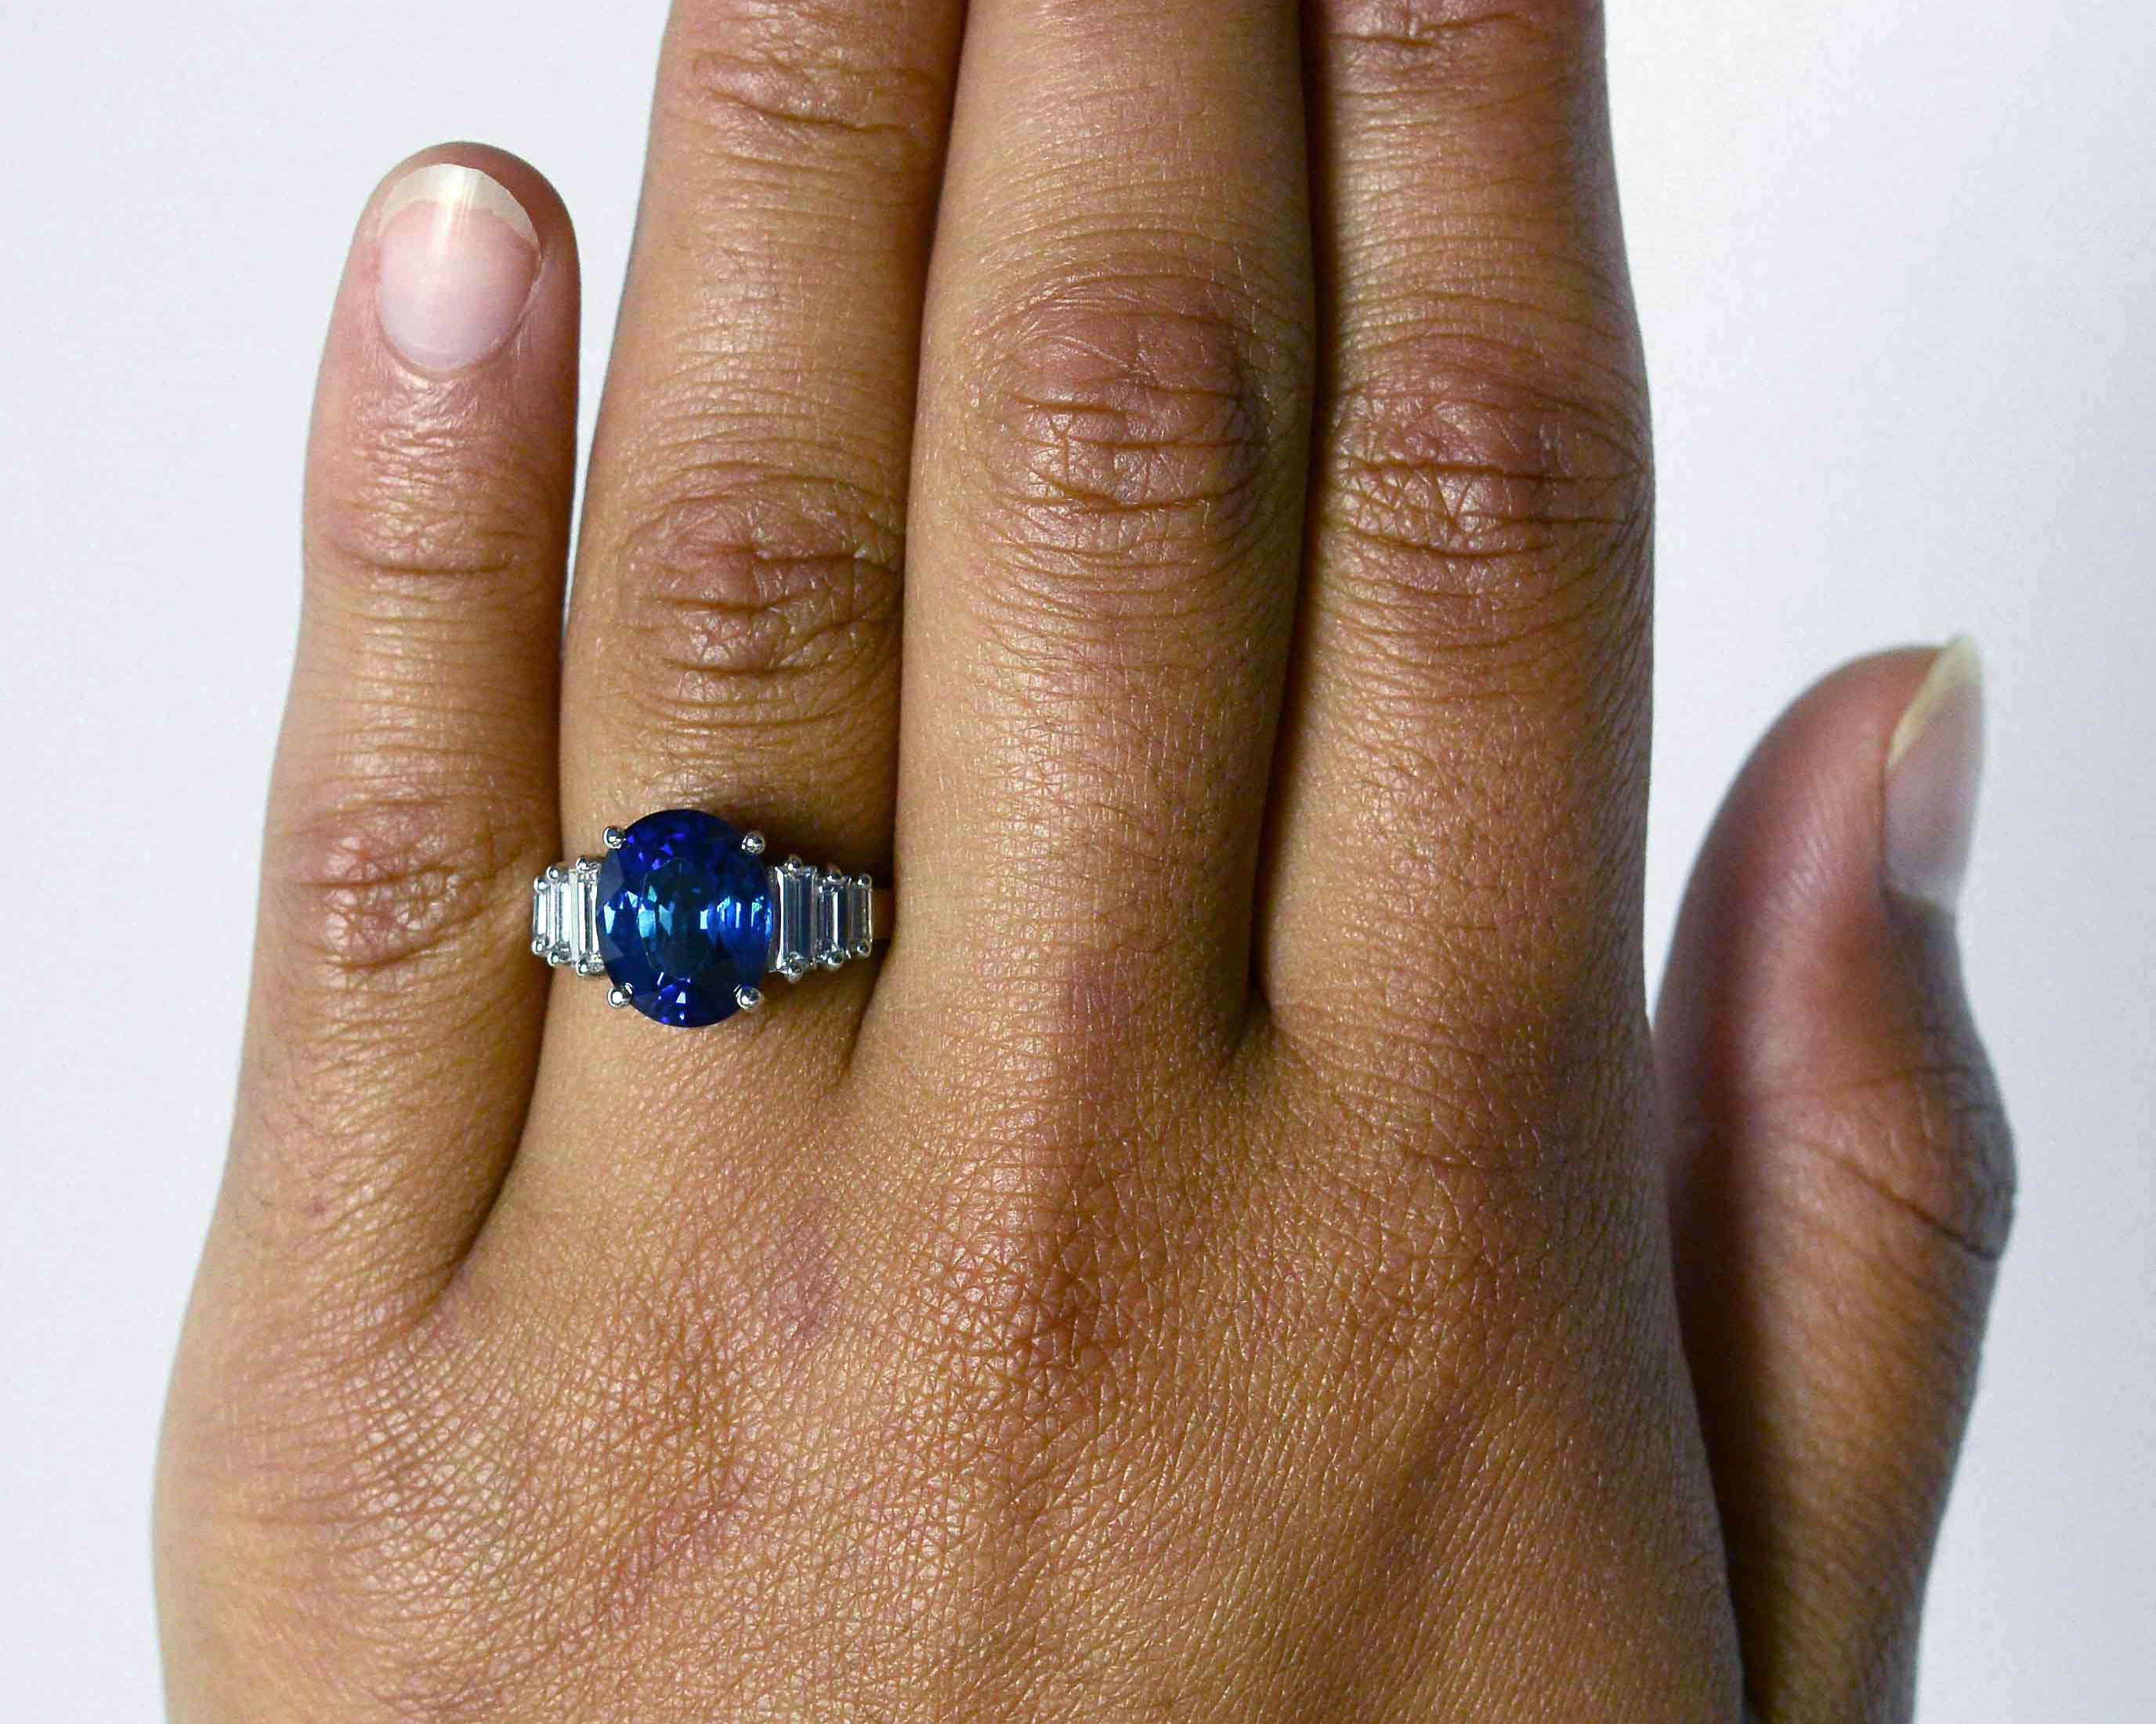 This size 7 Art Deco revival wedding ring has a 4 carat blue sapphire.